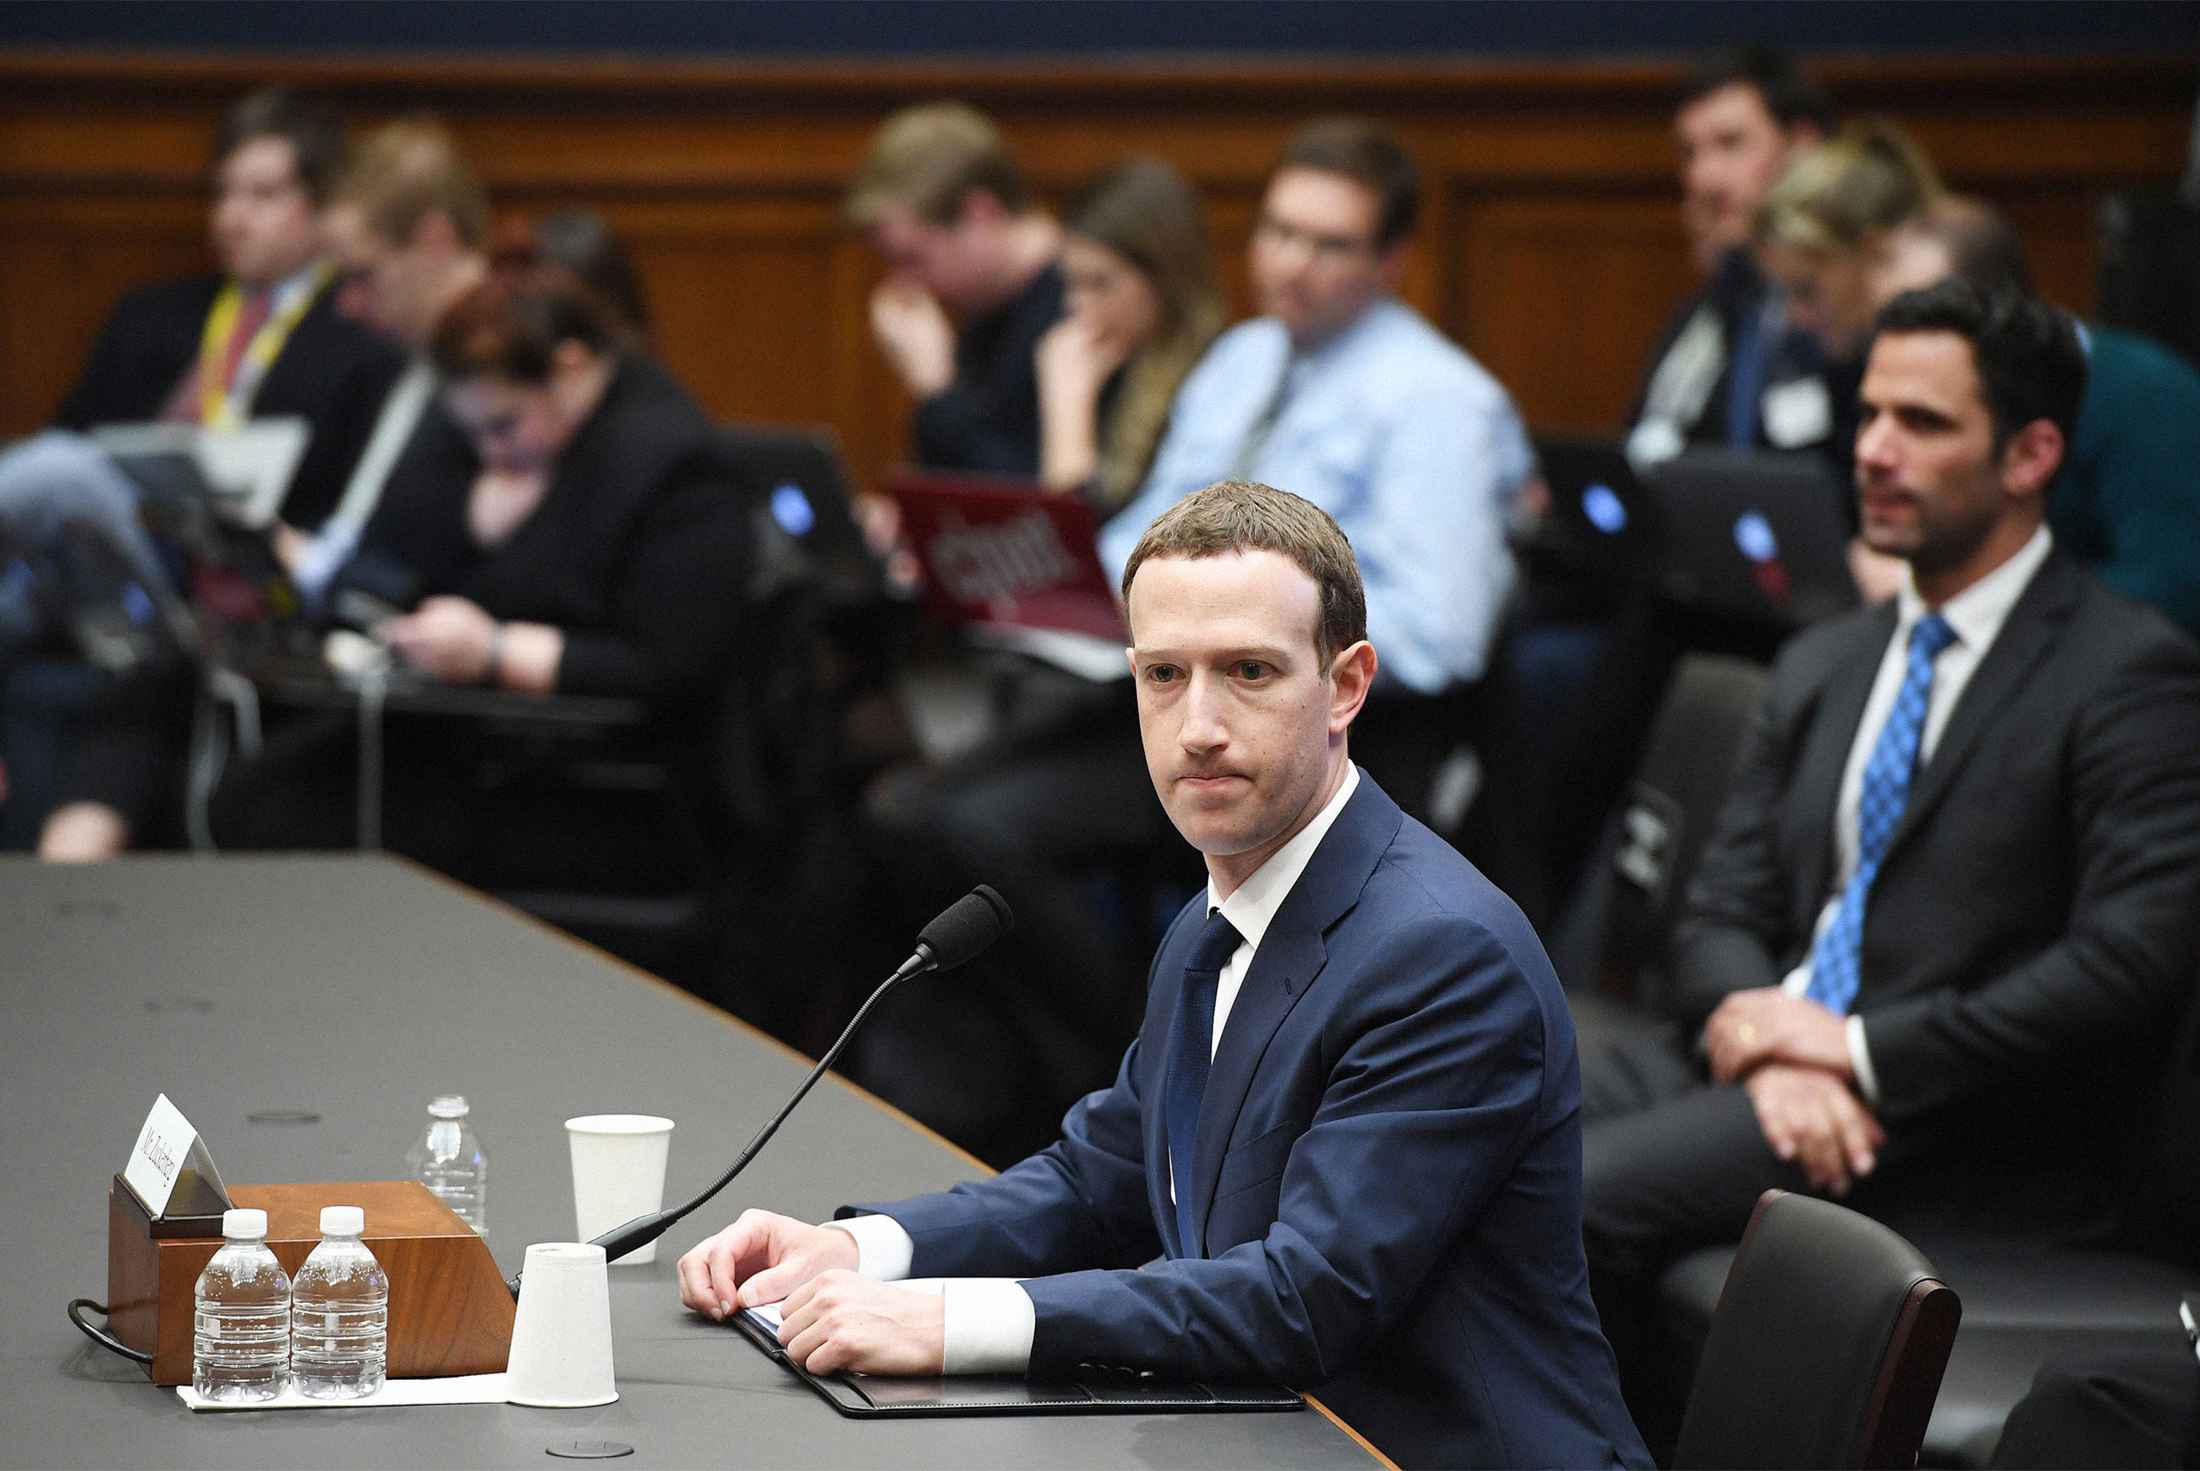 Facebook CEO&nbsp;Mark Zuckerberg at a hearing before the House Energy and Commerce Committee in Washington on April 11, 2018.